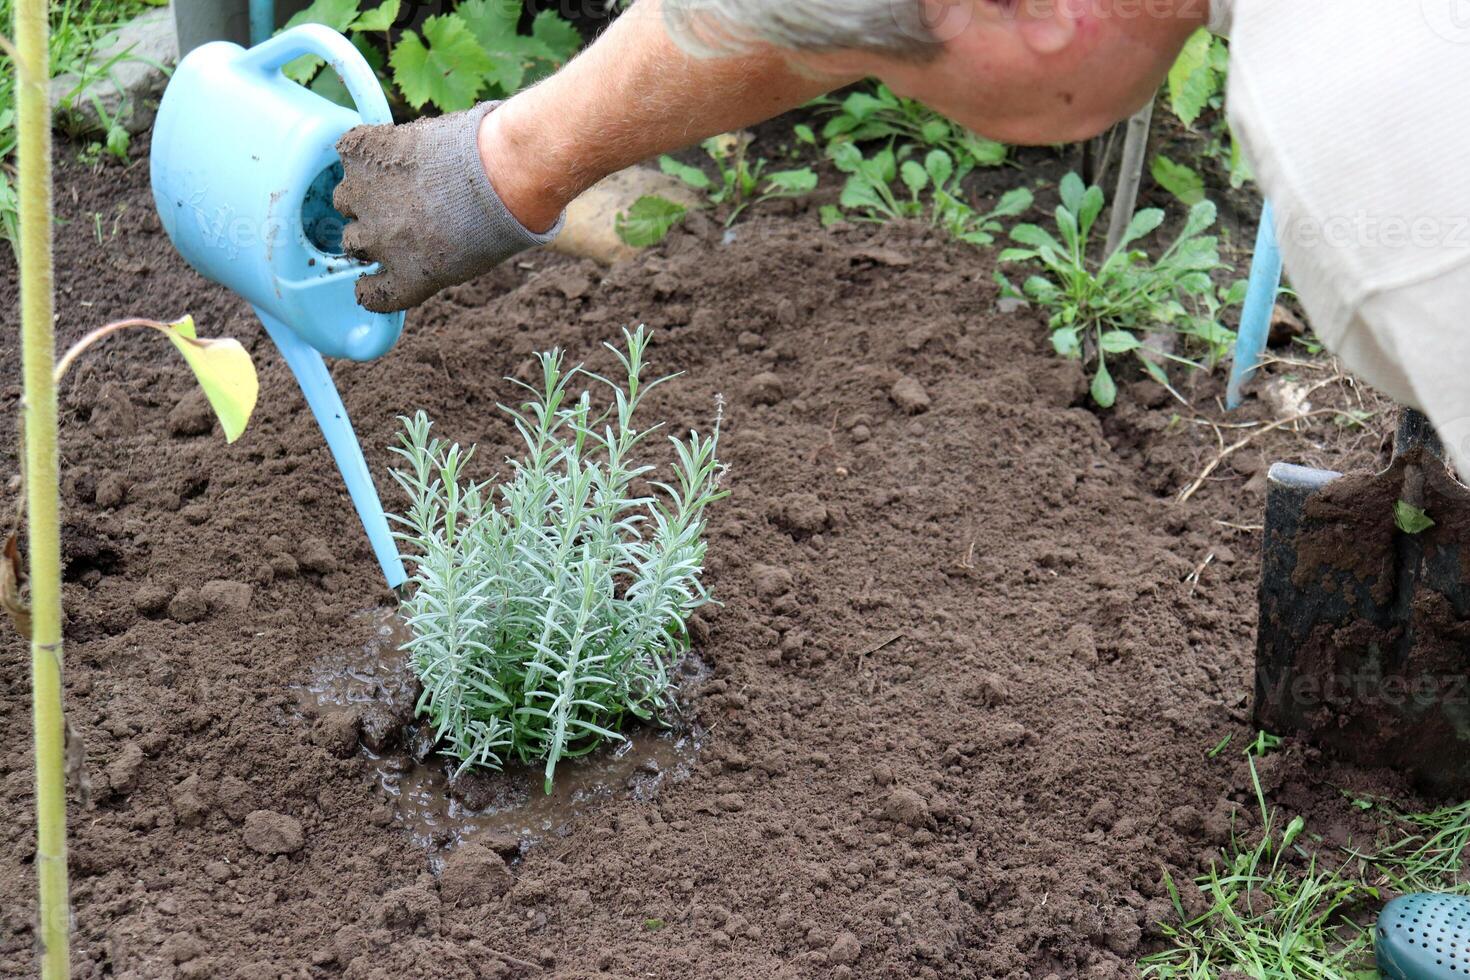 A retired man waters a freshly planted lavender bush in a garden bed on a cloudy summer day - hand with a watering can and cheek - close-up, horizontal photo. Gardening, hobbies, plant care, gardening photo